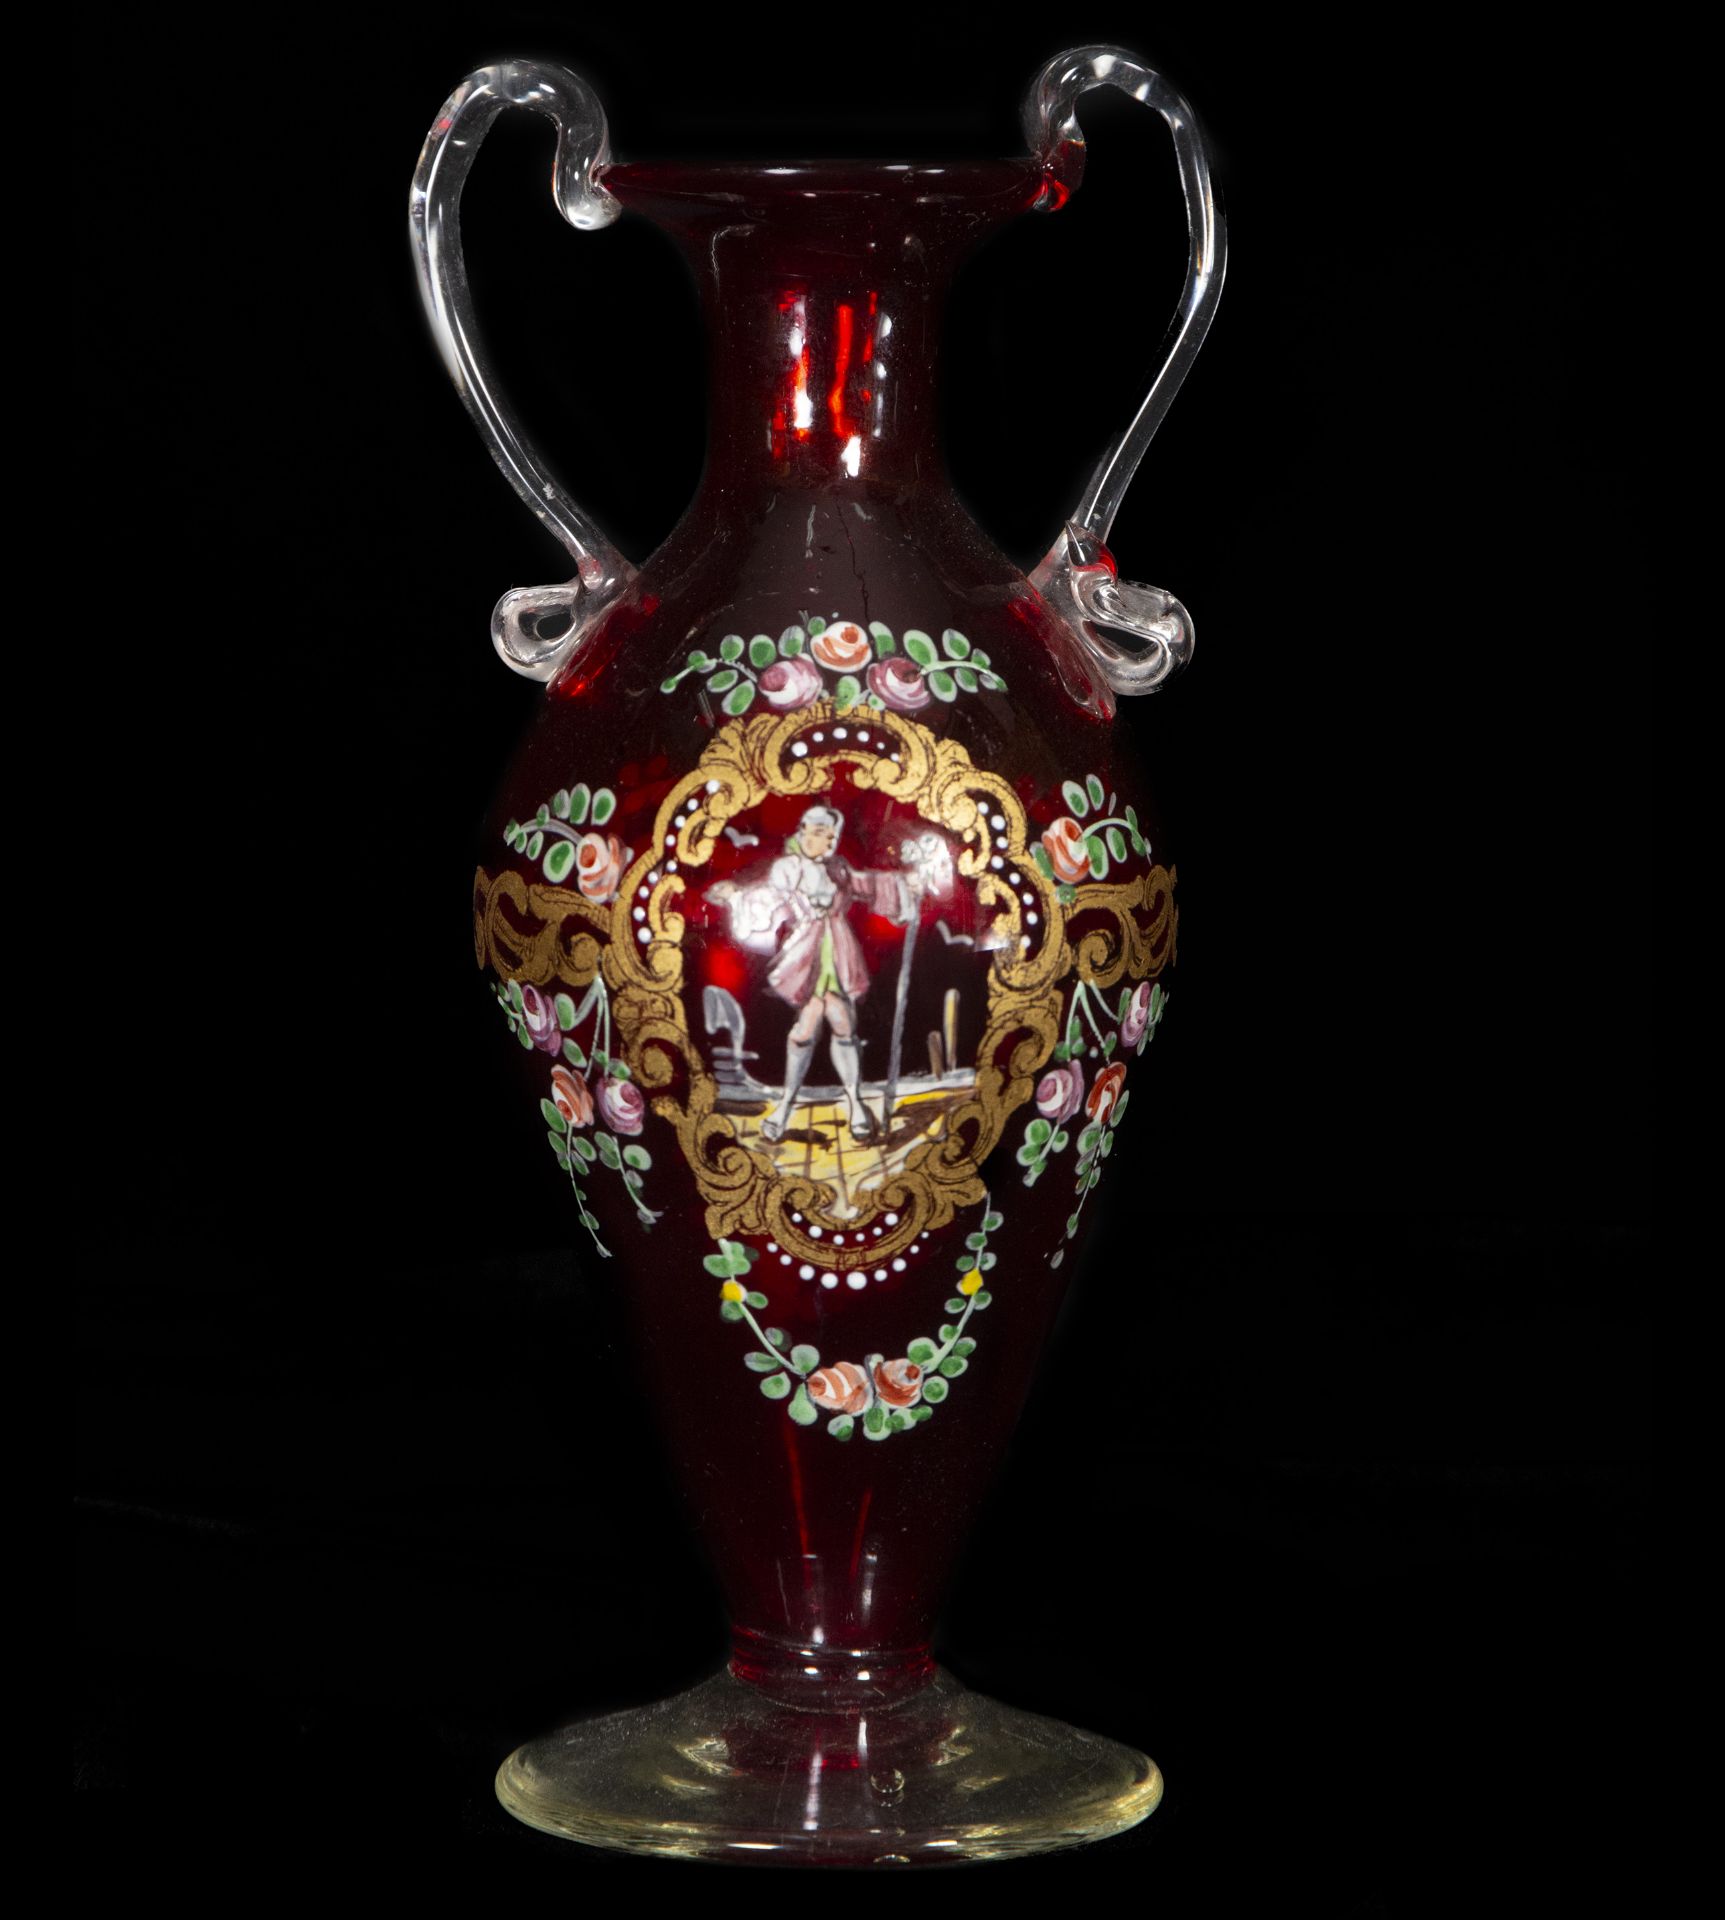 Bohemian glass cup and bottle, 19th century - Image 2 of 6